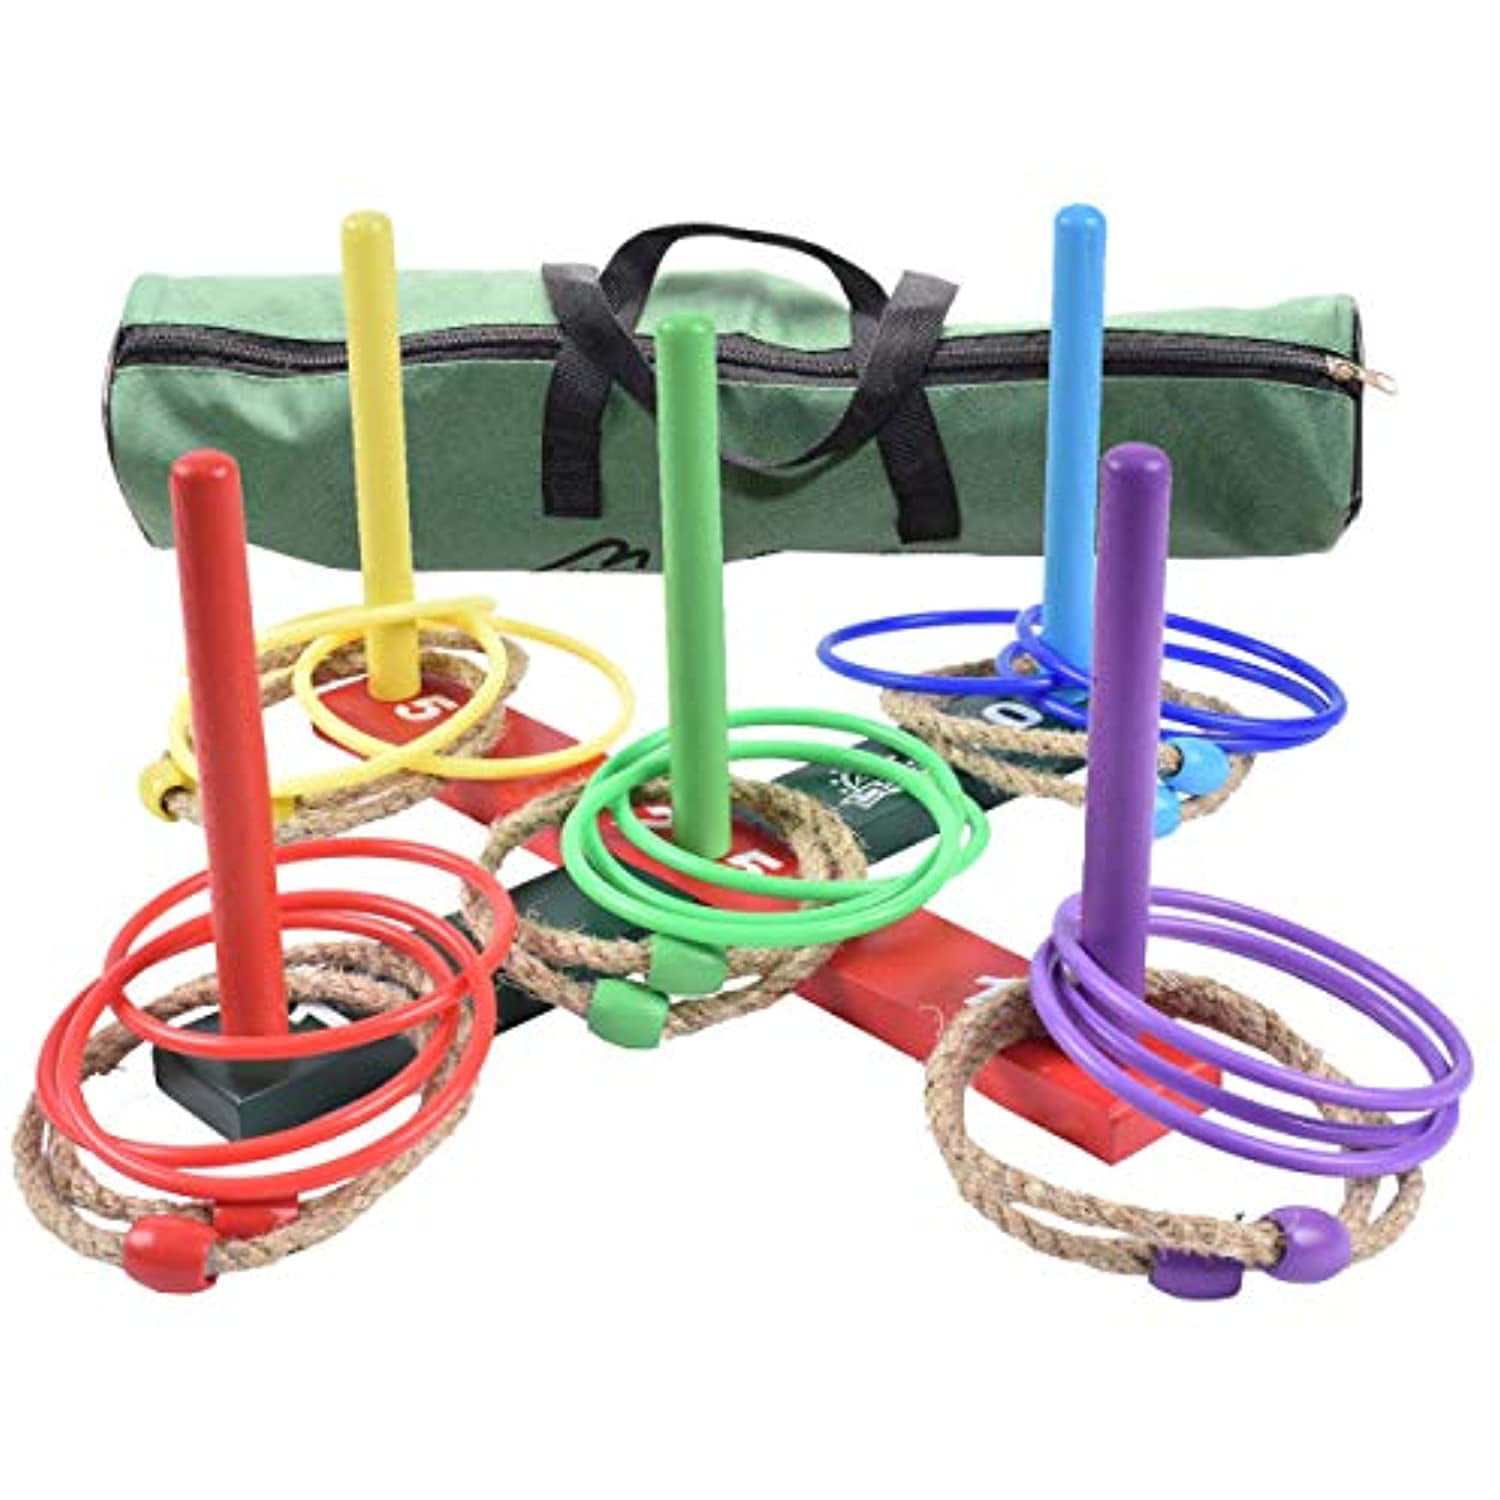 15 Ropes & Plastic Rings Lawn Fun for Kids Durable Wooden Hook Toys Ring Toss Game Set with Carrying Bag 